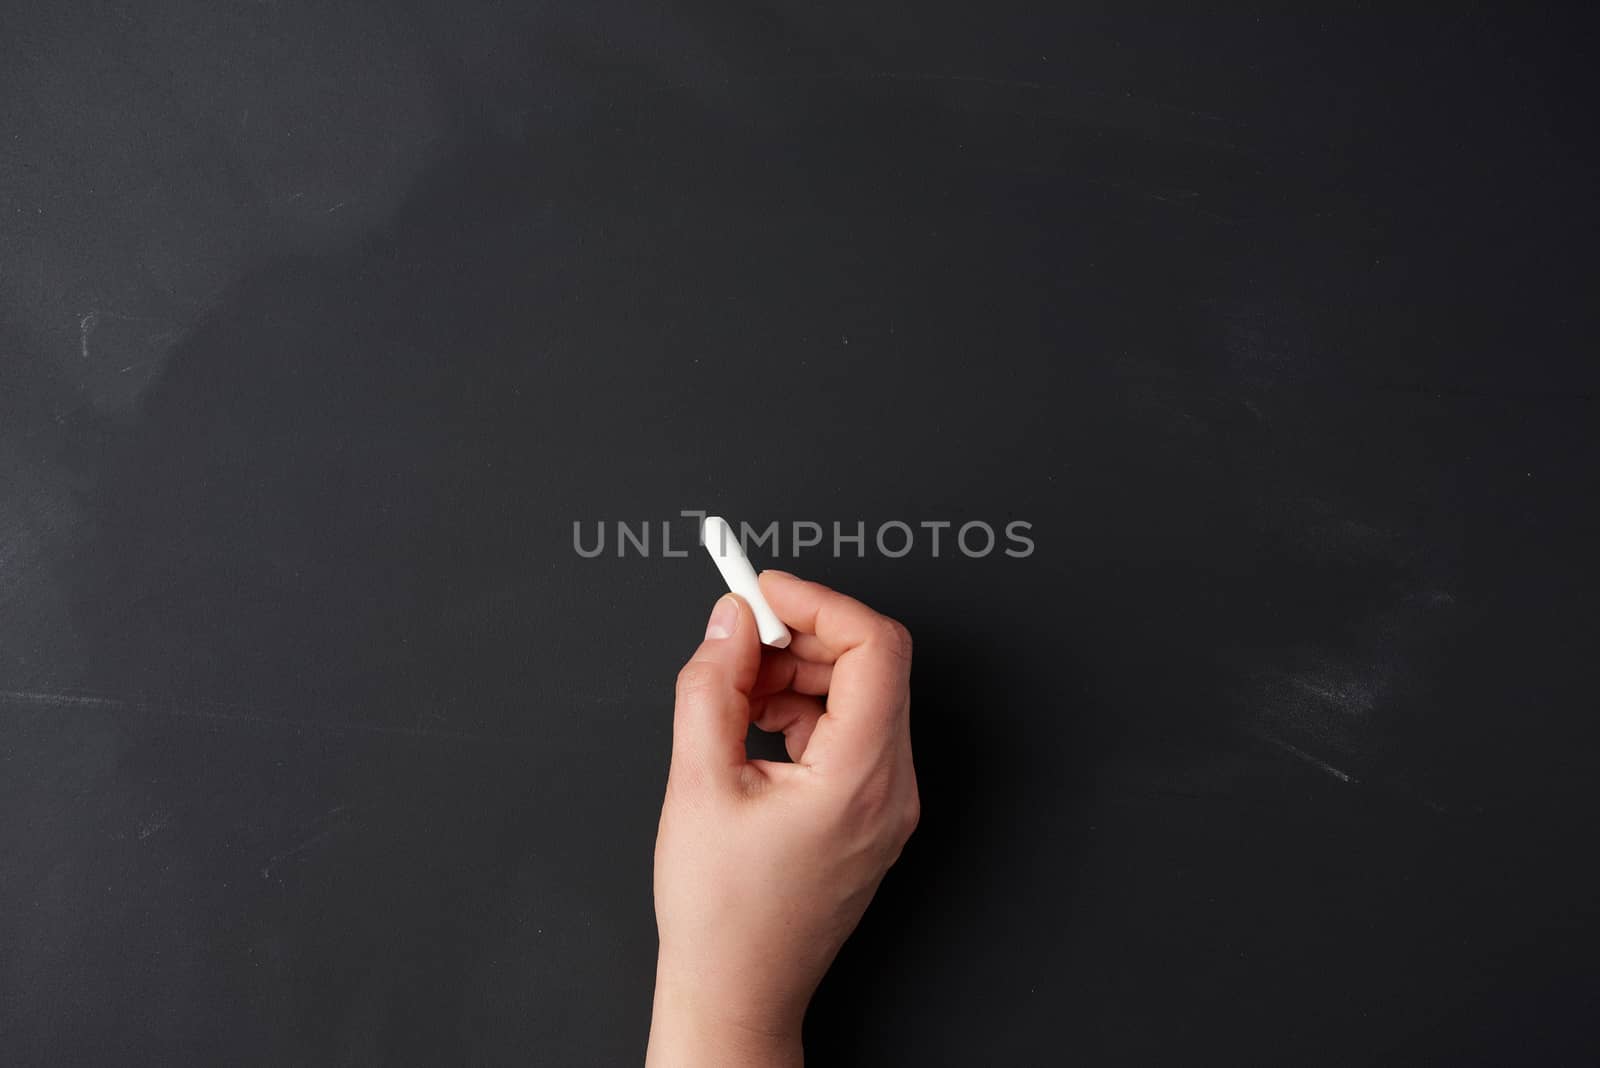 hand holds a piece of white chalk on the background of an empty black chalk board, presentation concept, back to school